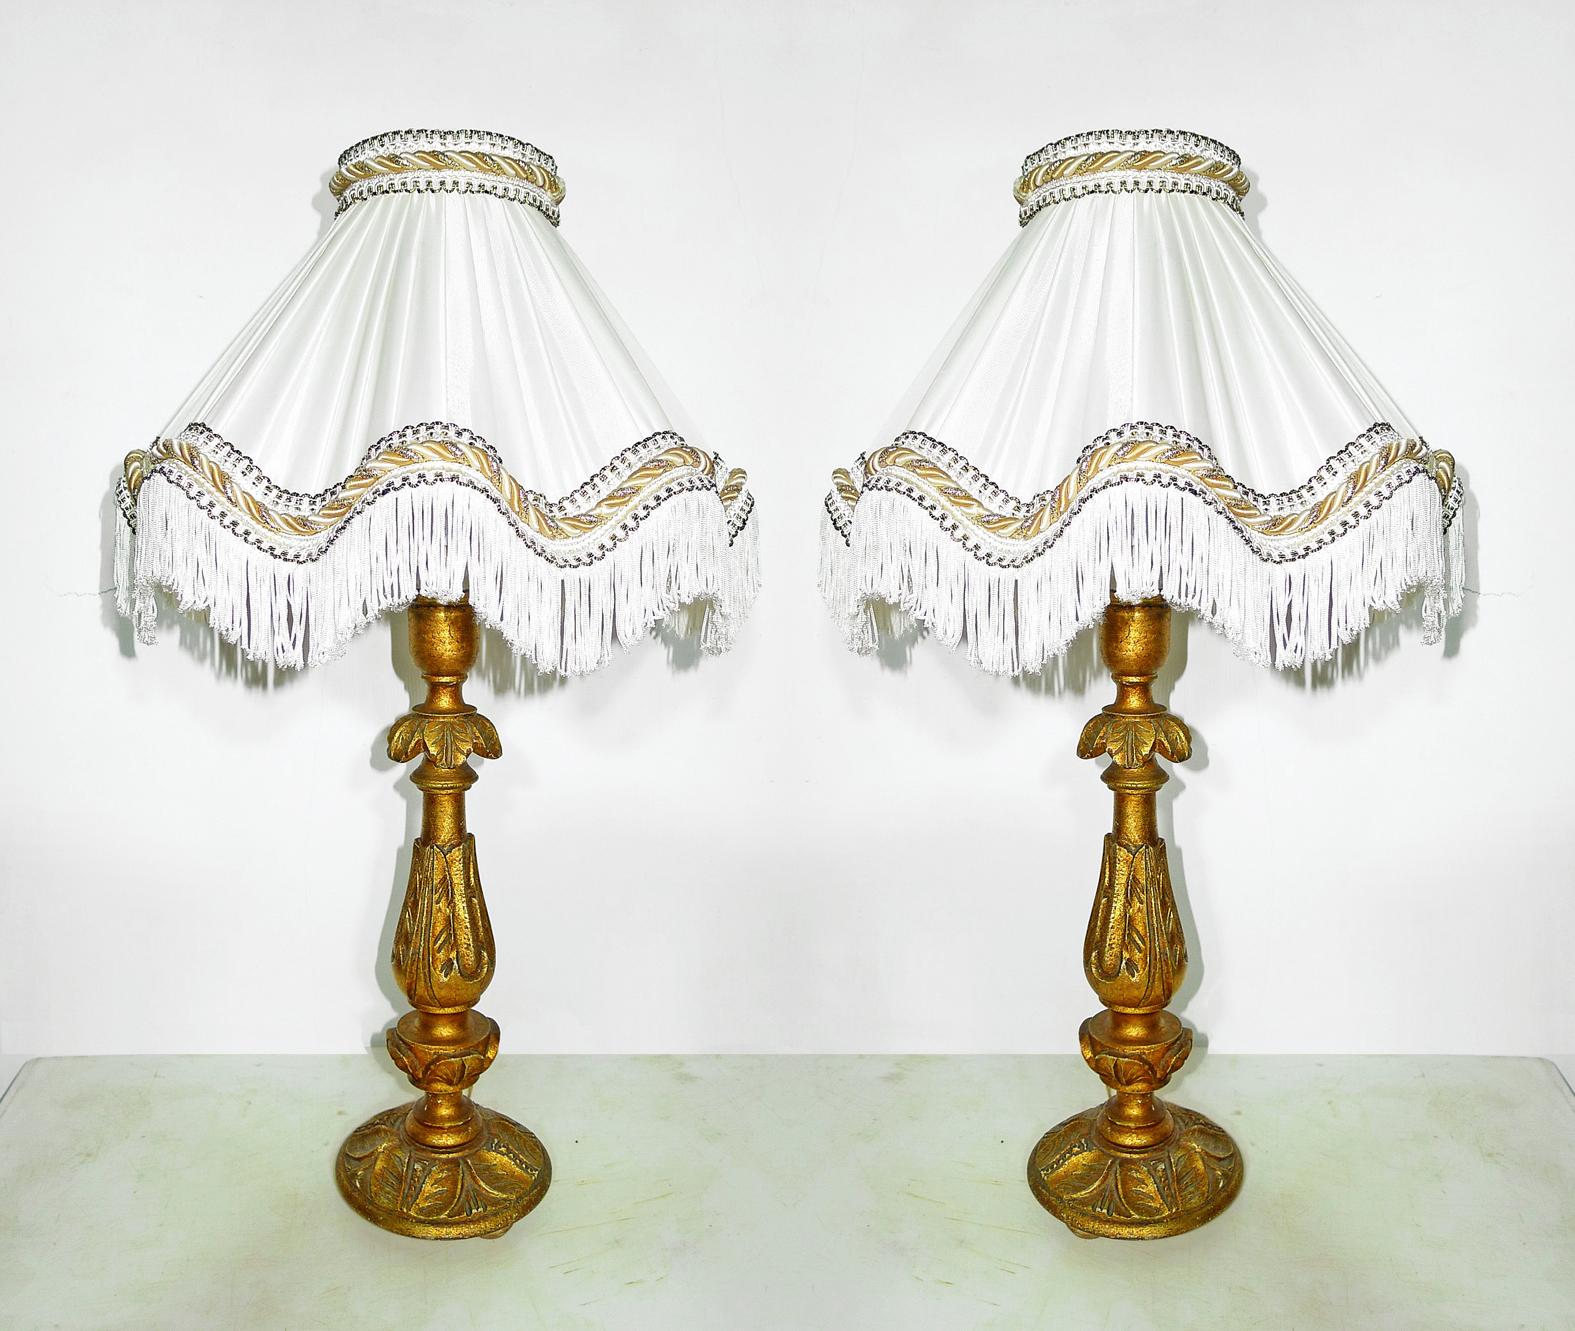 Pair of elegant Italian baroque carved giltwood candlesticks torchères turned into table lamps with ivory silk lampshades
Measures:
Height 24 in /60 cm
Diameter 14 in /36 cm
Weight 5 lb. /2,5 kg
Housing one light bulb each ( E14 )
Good working